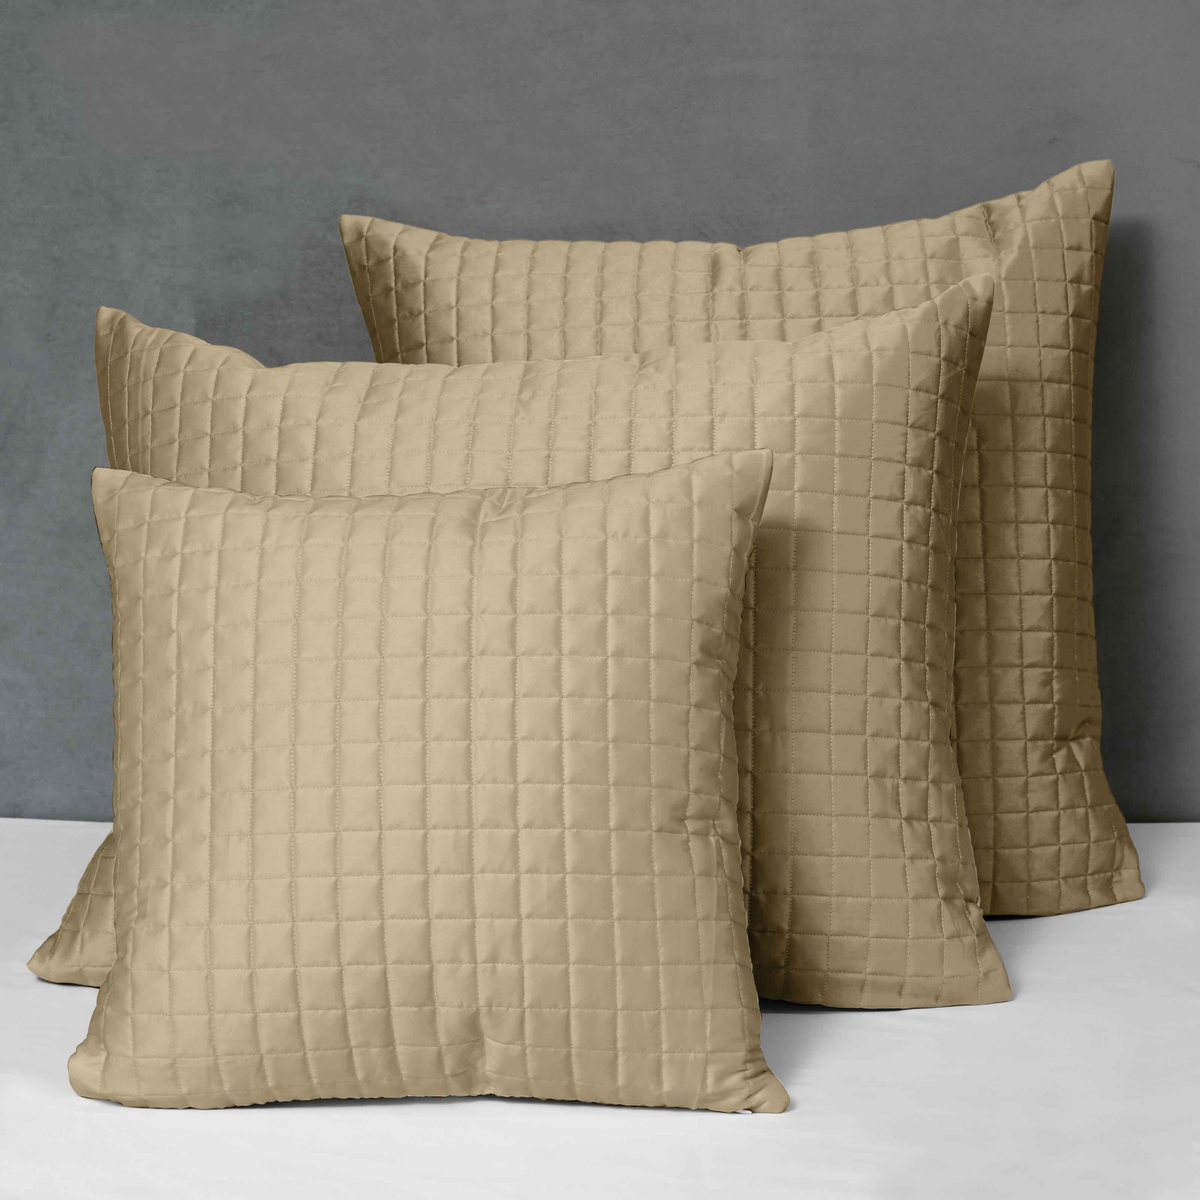 Different Sizes of Quilted Shams of Signoria Masaccio Bedding in Coffee Color